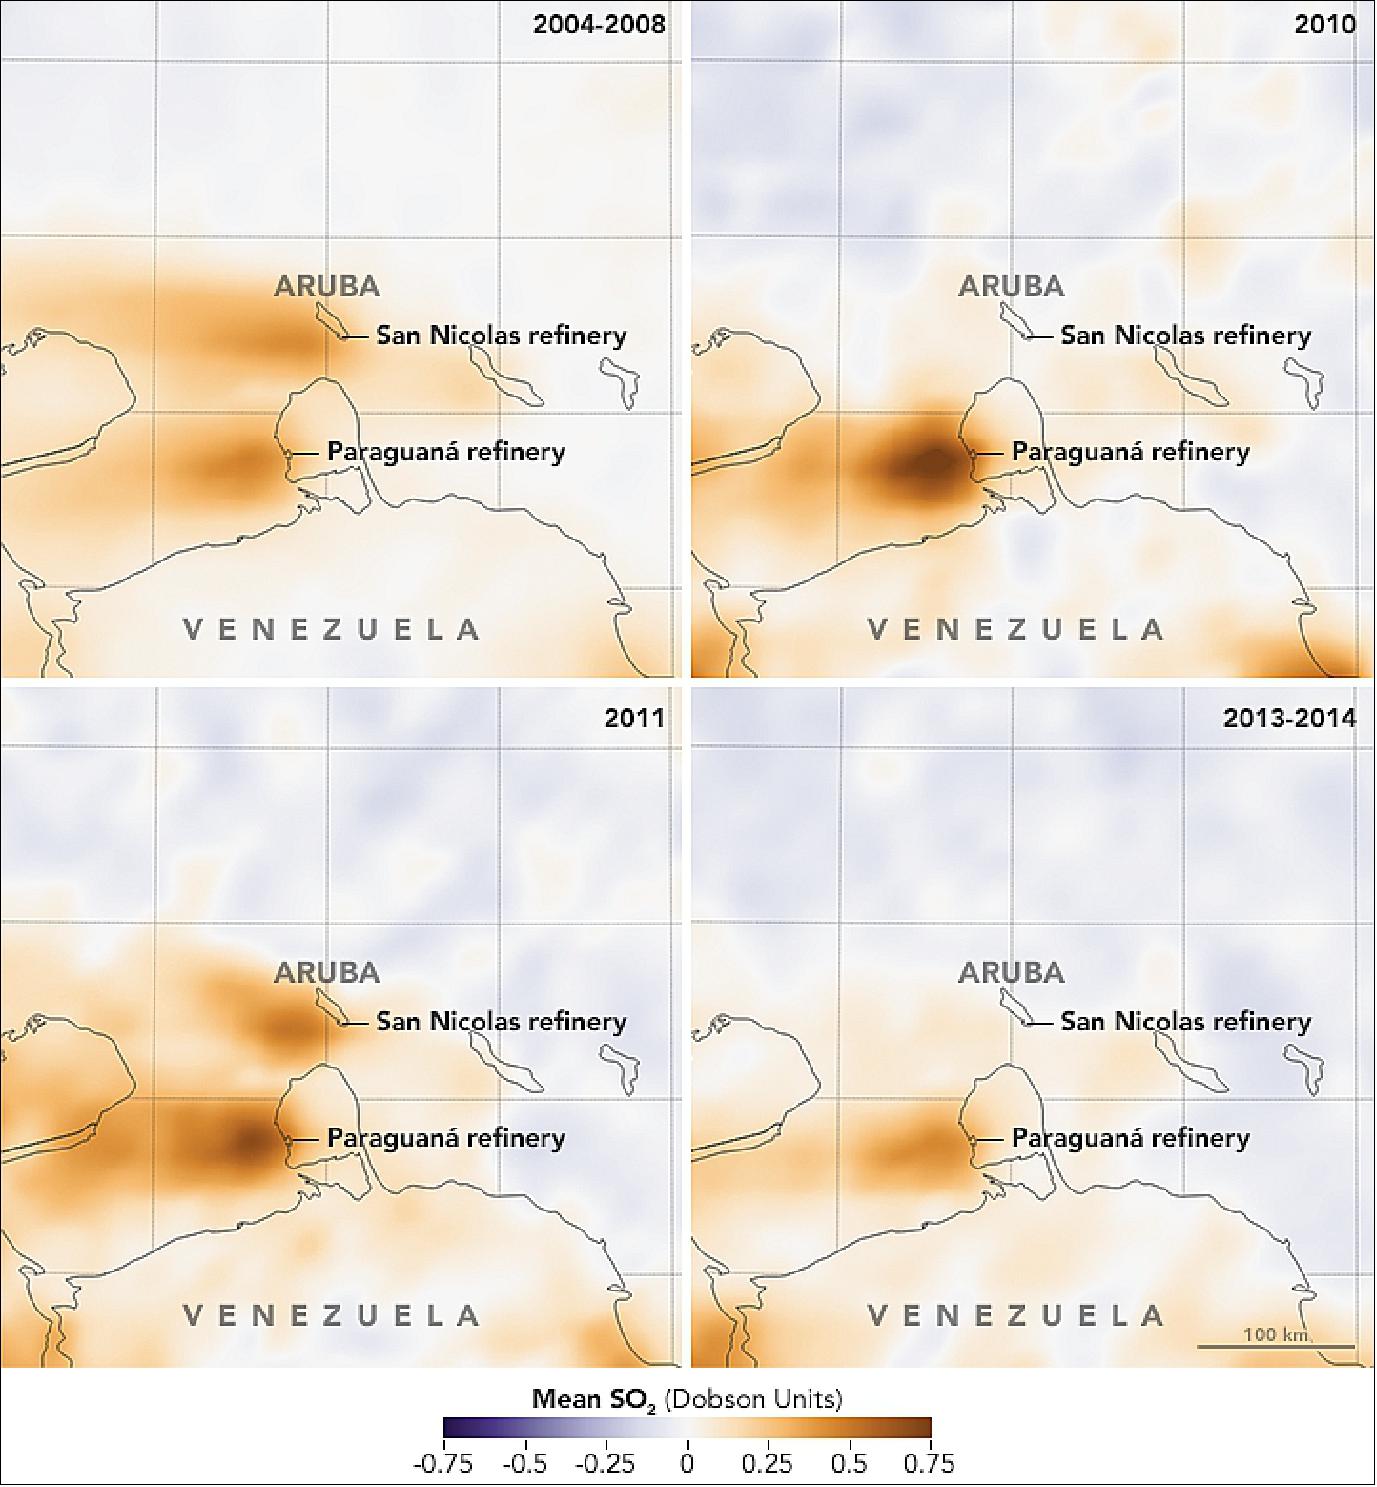 Figure 39: Plots of SO2 emissions acquired with OMI on Aura in various time slots over Aruba and Venezuela (image credit: NASA Earth Observatory, images by Joshua Stevens, using emissions data courtesy of Fioletov, Vitali E., et al. (2017))